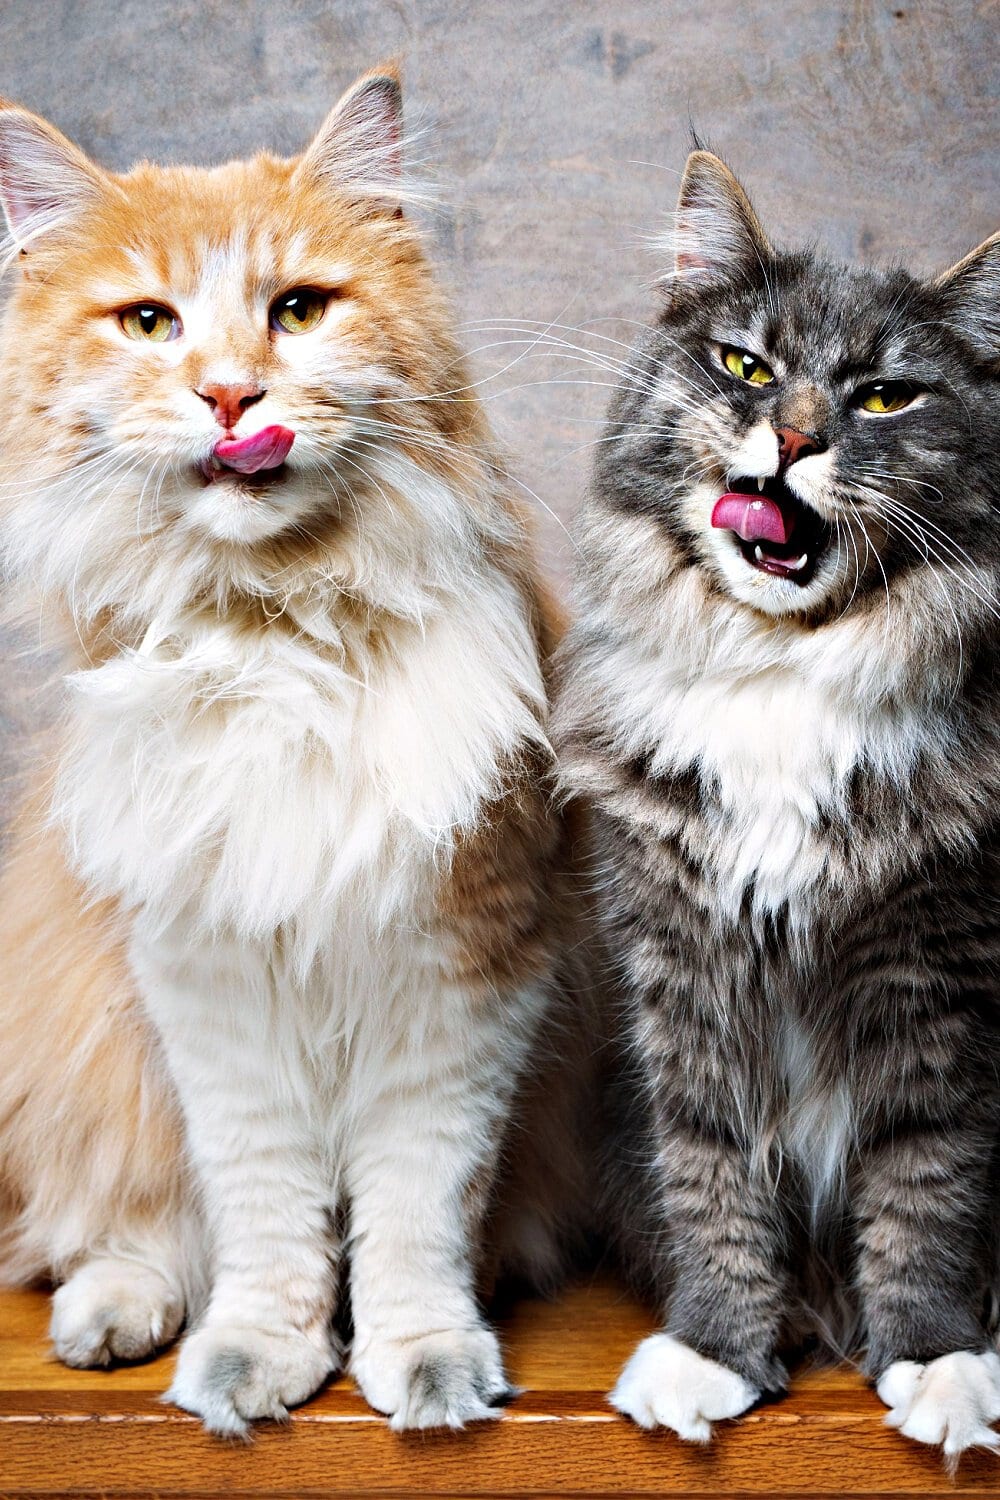 funn portrait of two hungry maine coon cats sitting side by side waiting for treats licking lips looking at camera